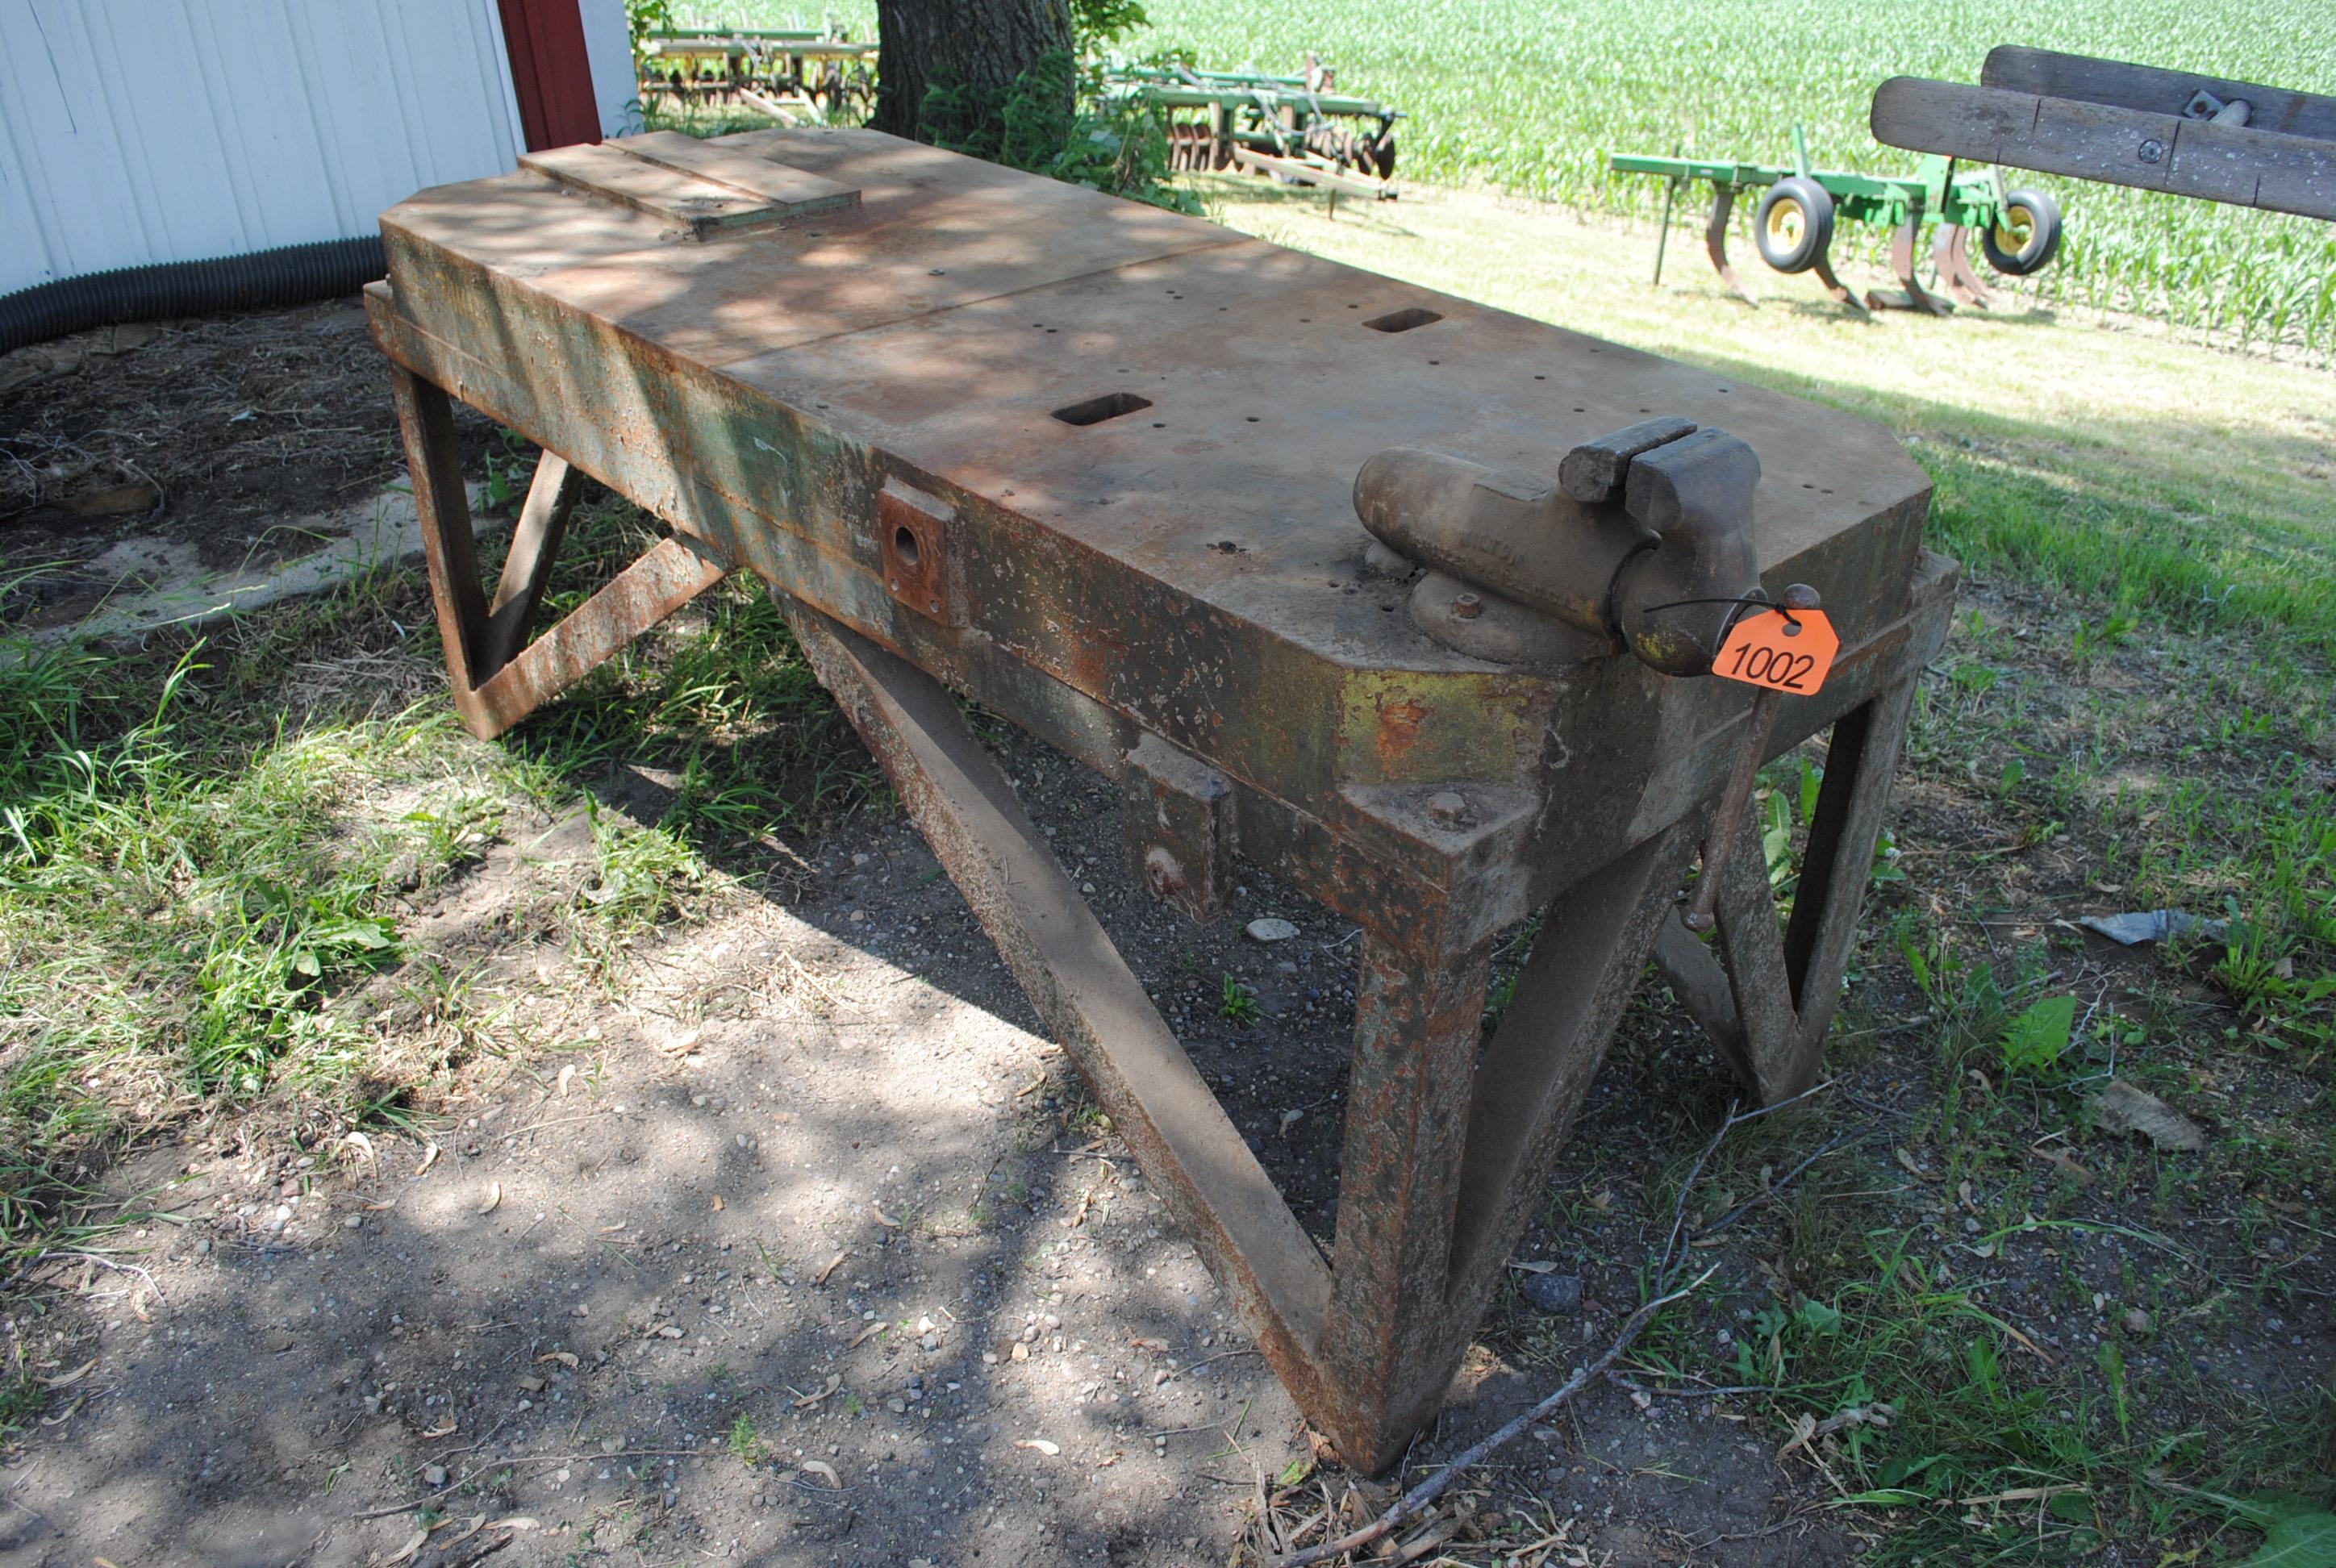 Welding Table with vise, 32" x 78.5" x 31" tall